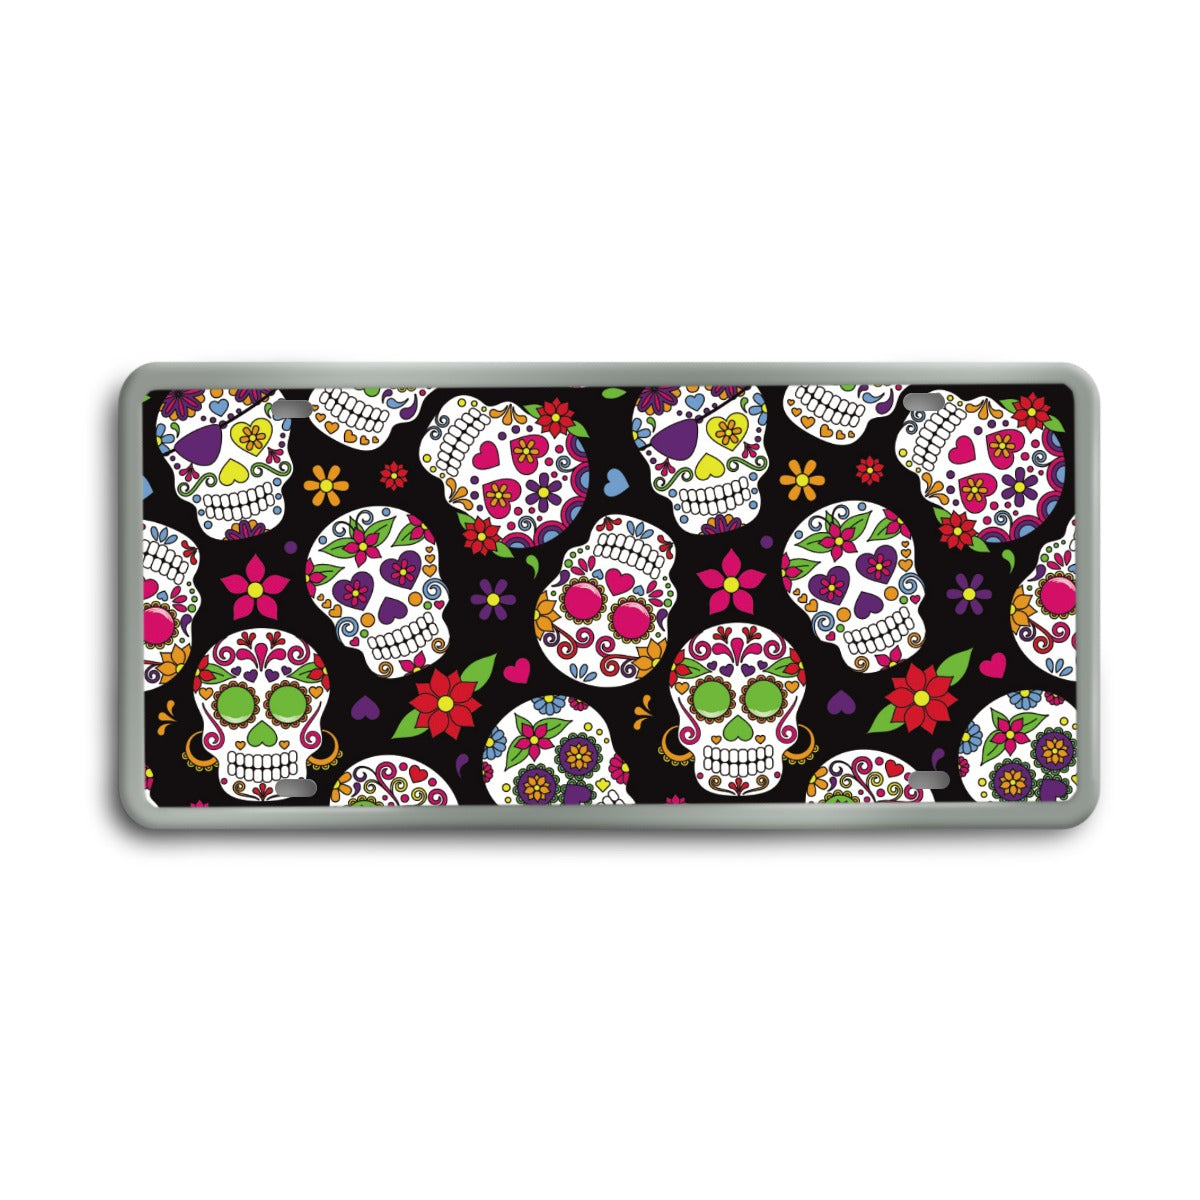 Day of the dead Vintage License Plate Decoration Painting, Gothic sugar skull Vintage License Plate